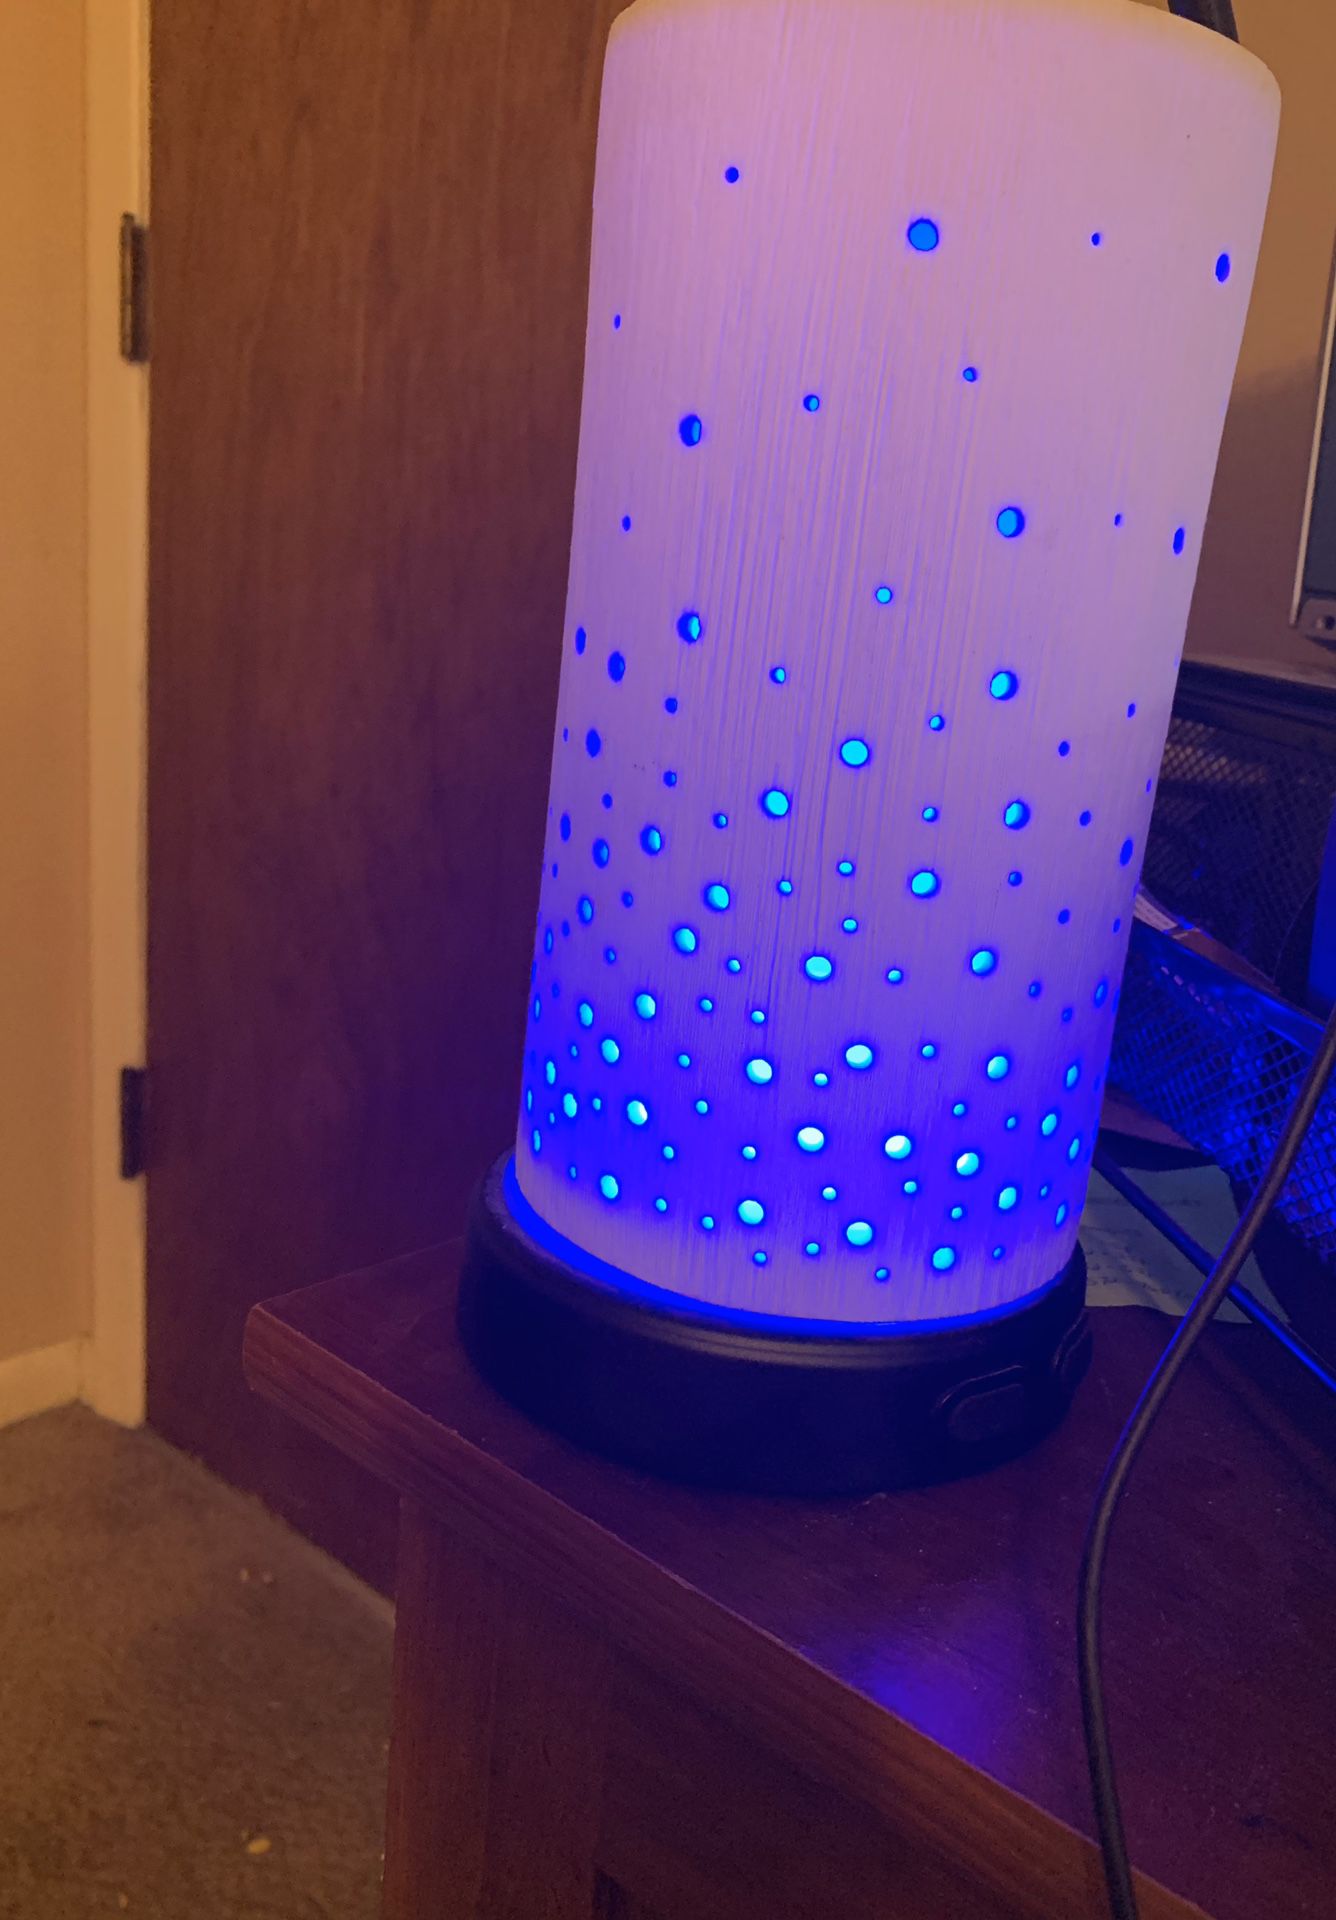 Scentsy Diffuser and Essential Oils